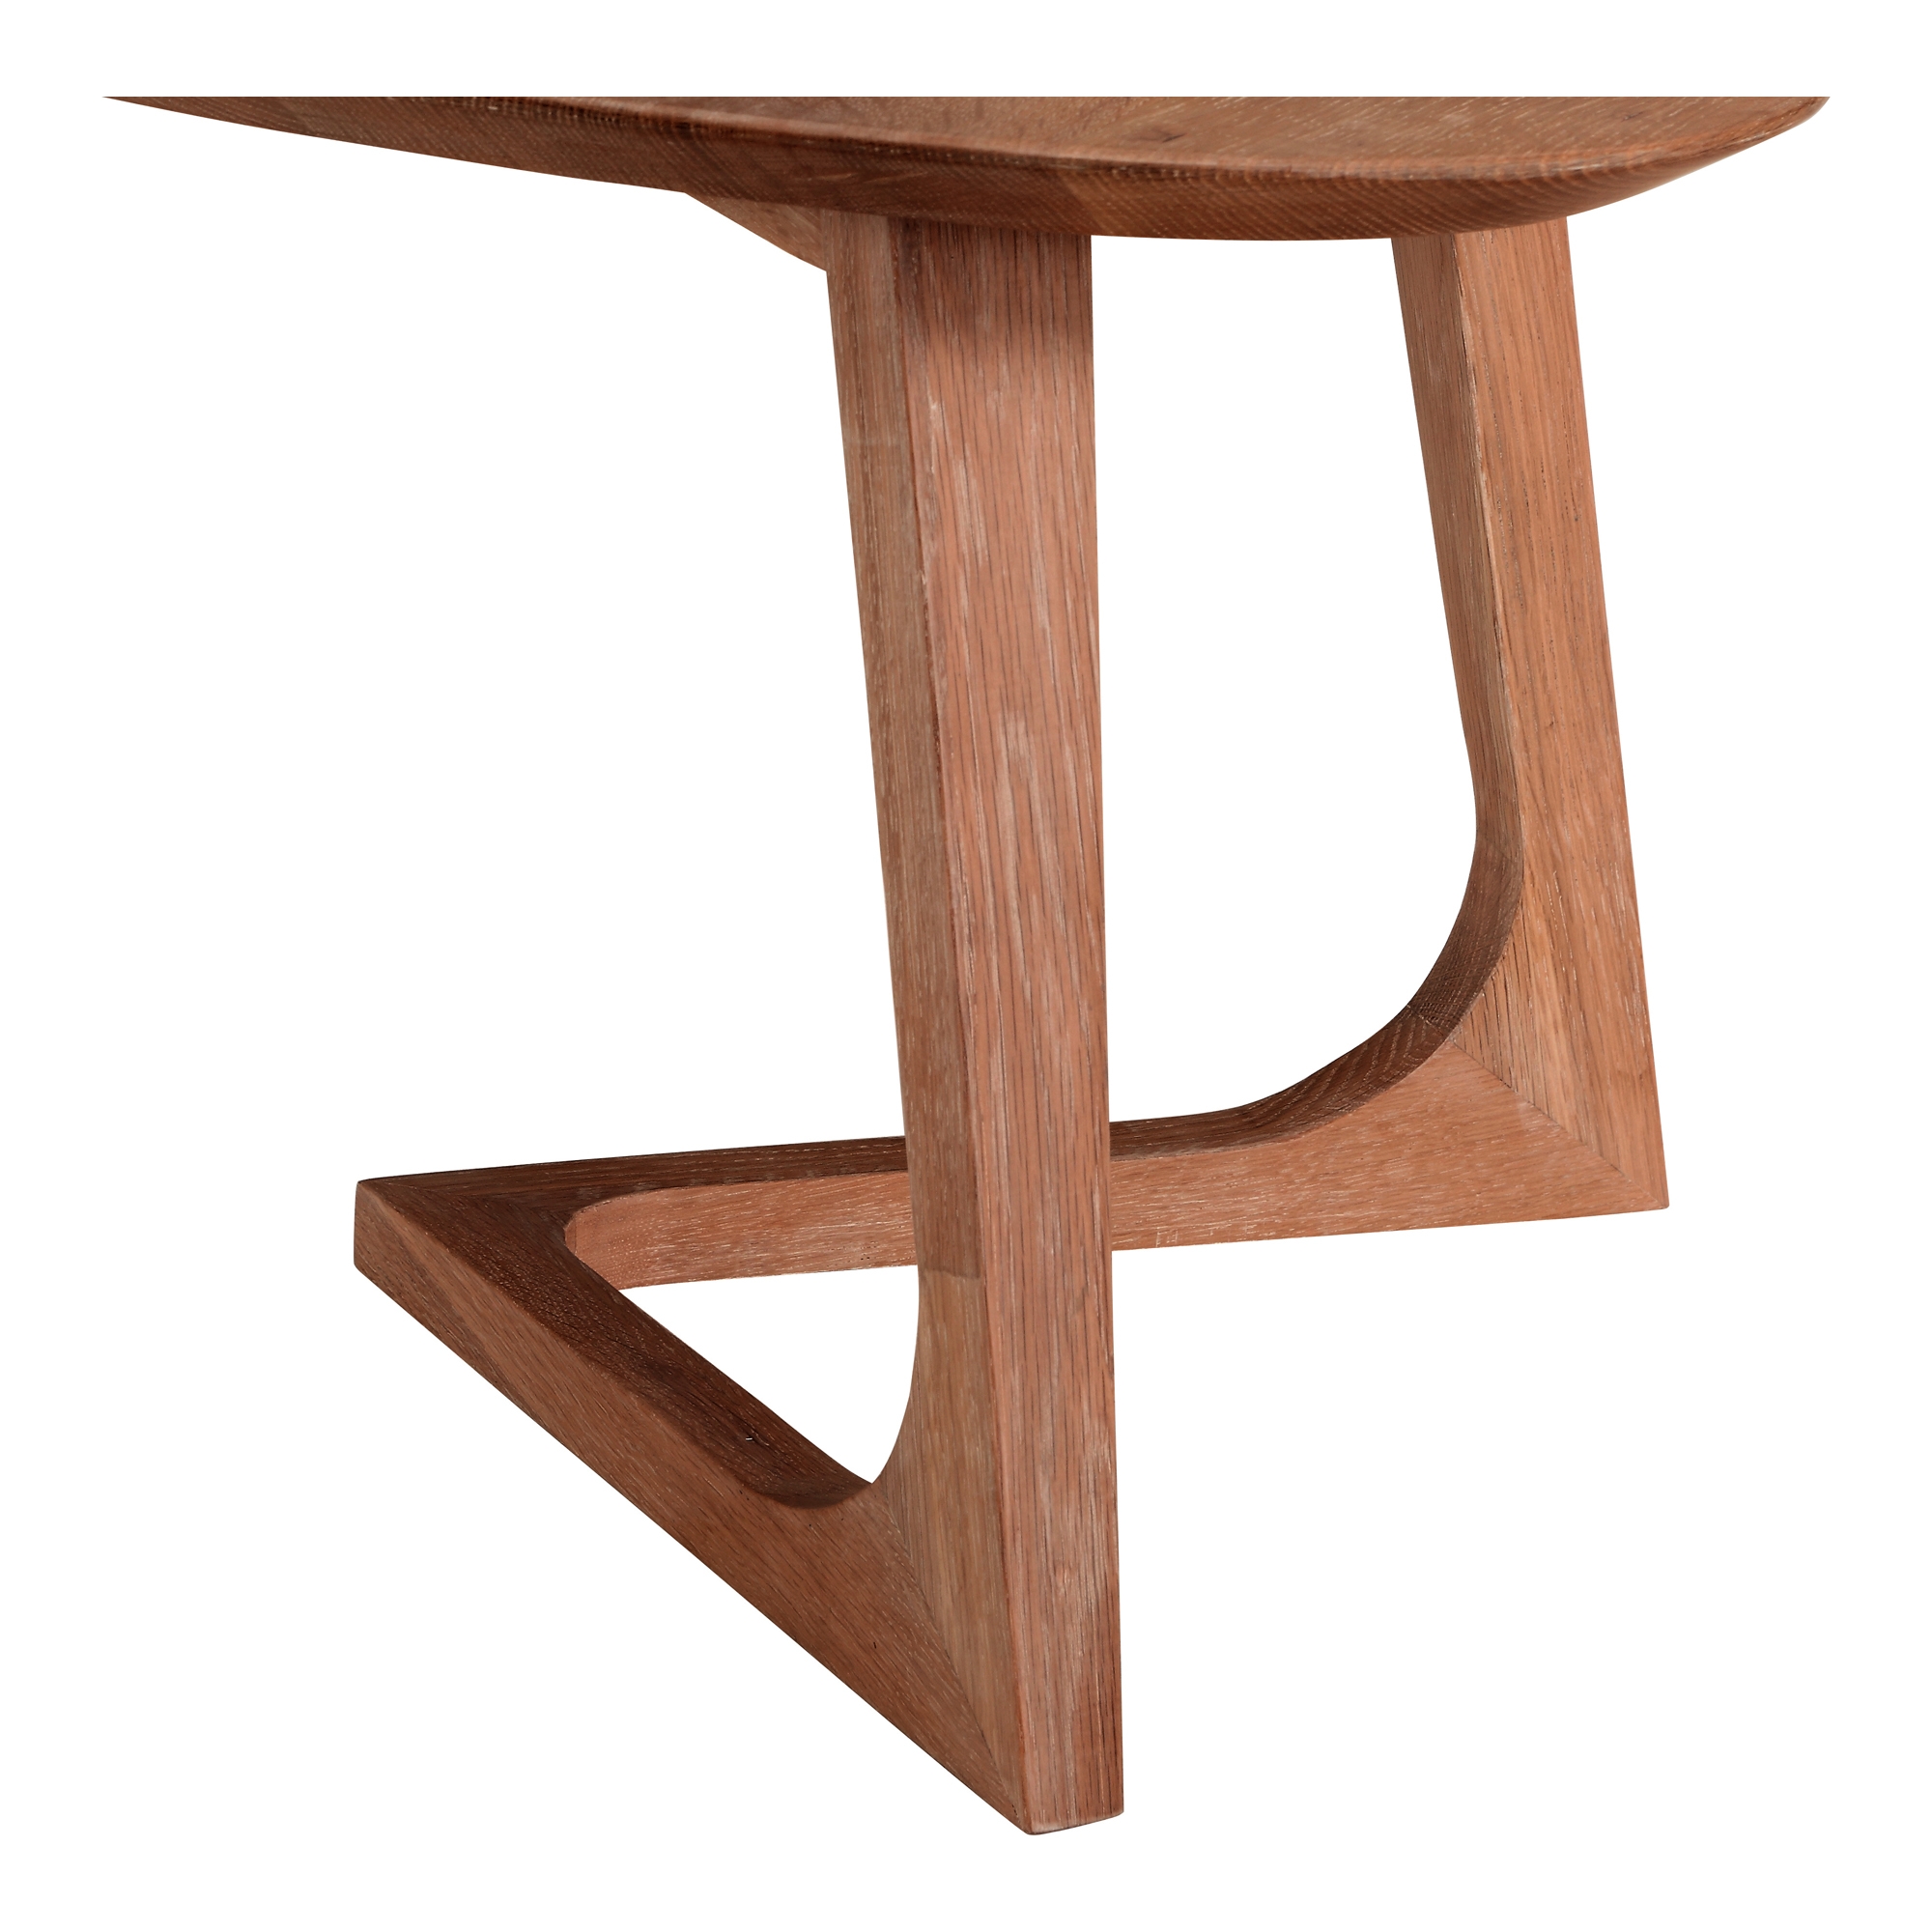 Godenza End Table Brown - Image 7